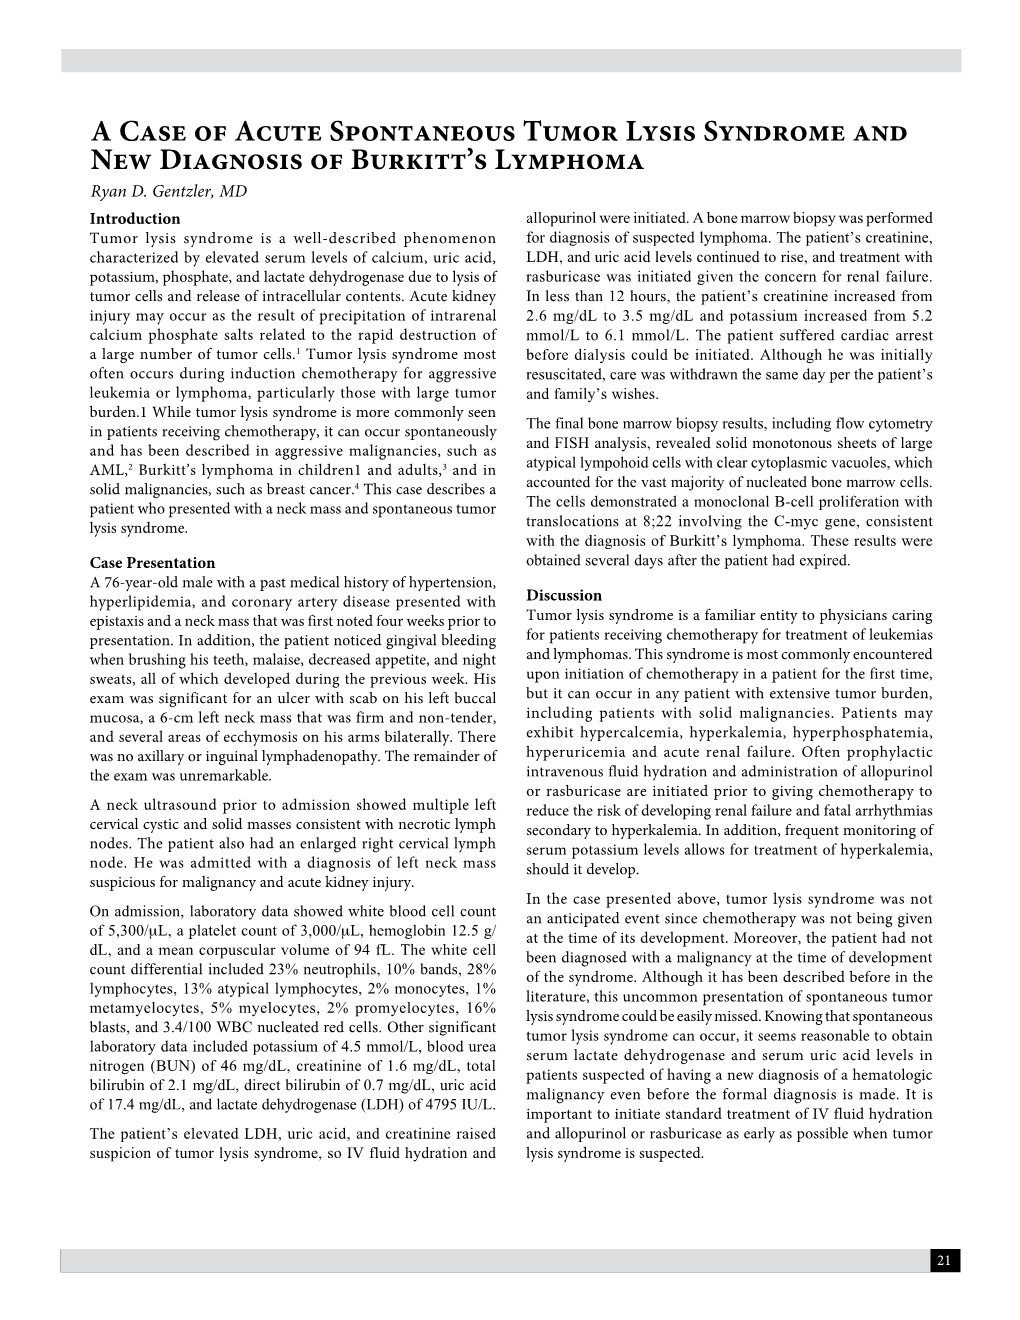 A Case of Acute Spontaneous Tumor Lysis Syndrome and New Diagnosis of Burkitt’S Lymphoma Ryan D